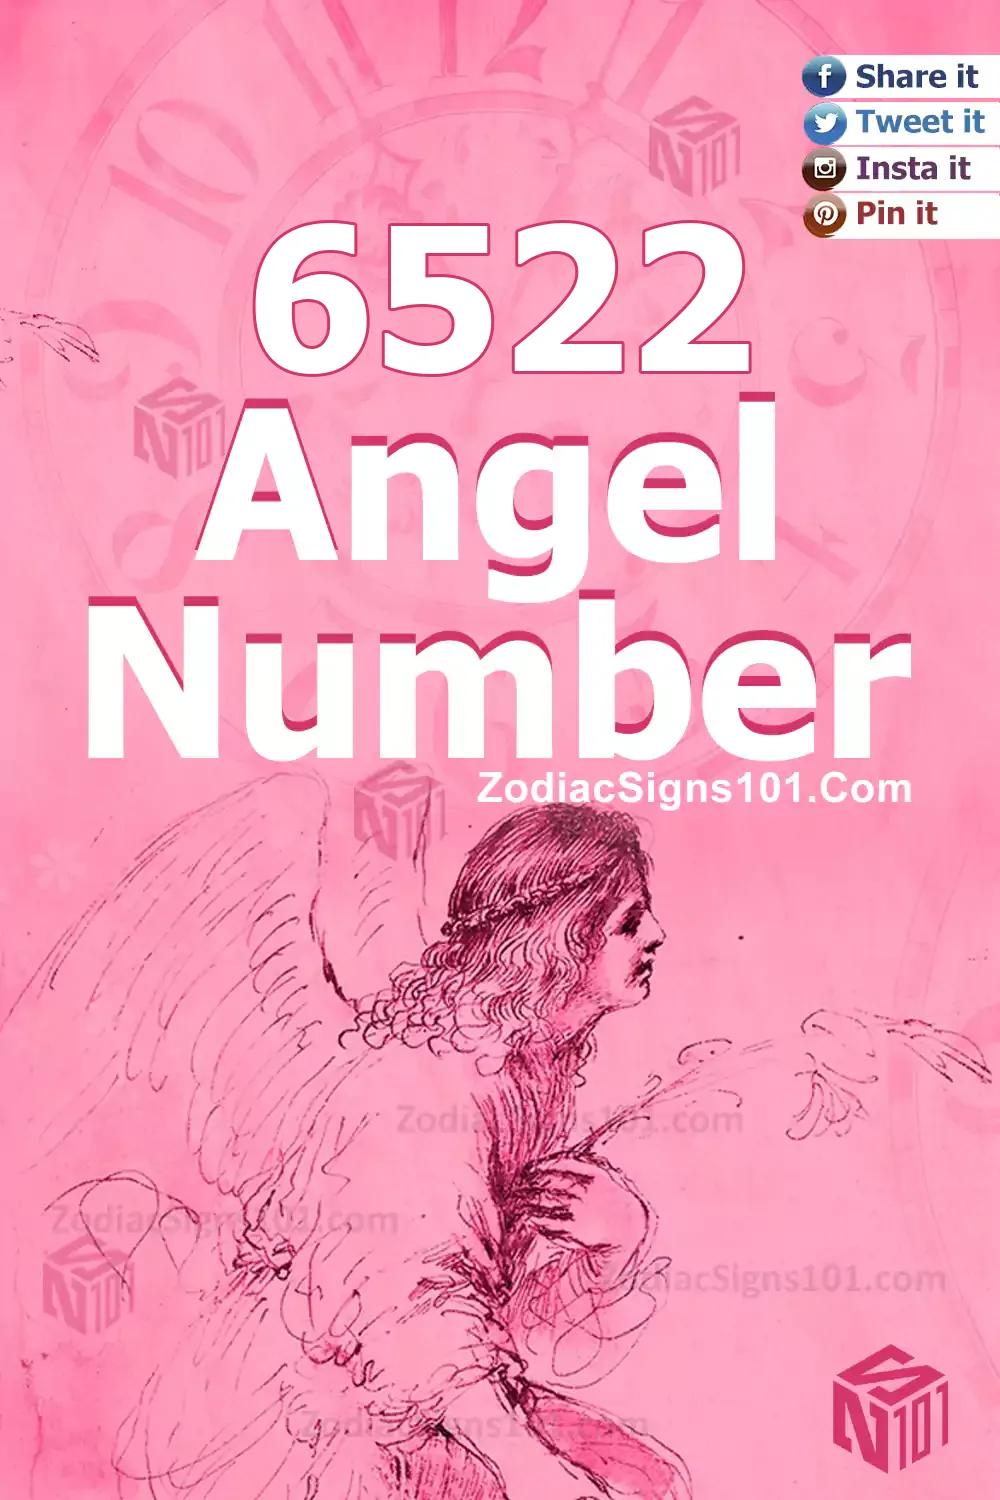 6522 Angel Number Meaning